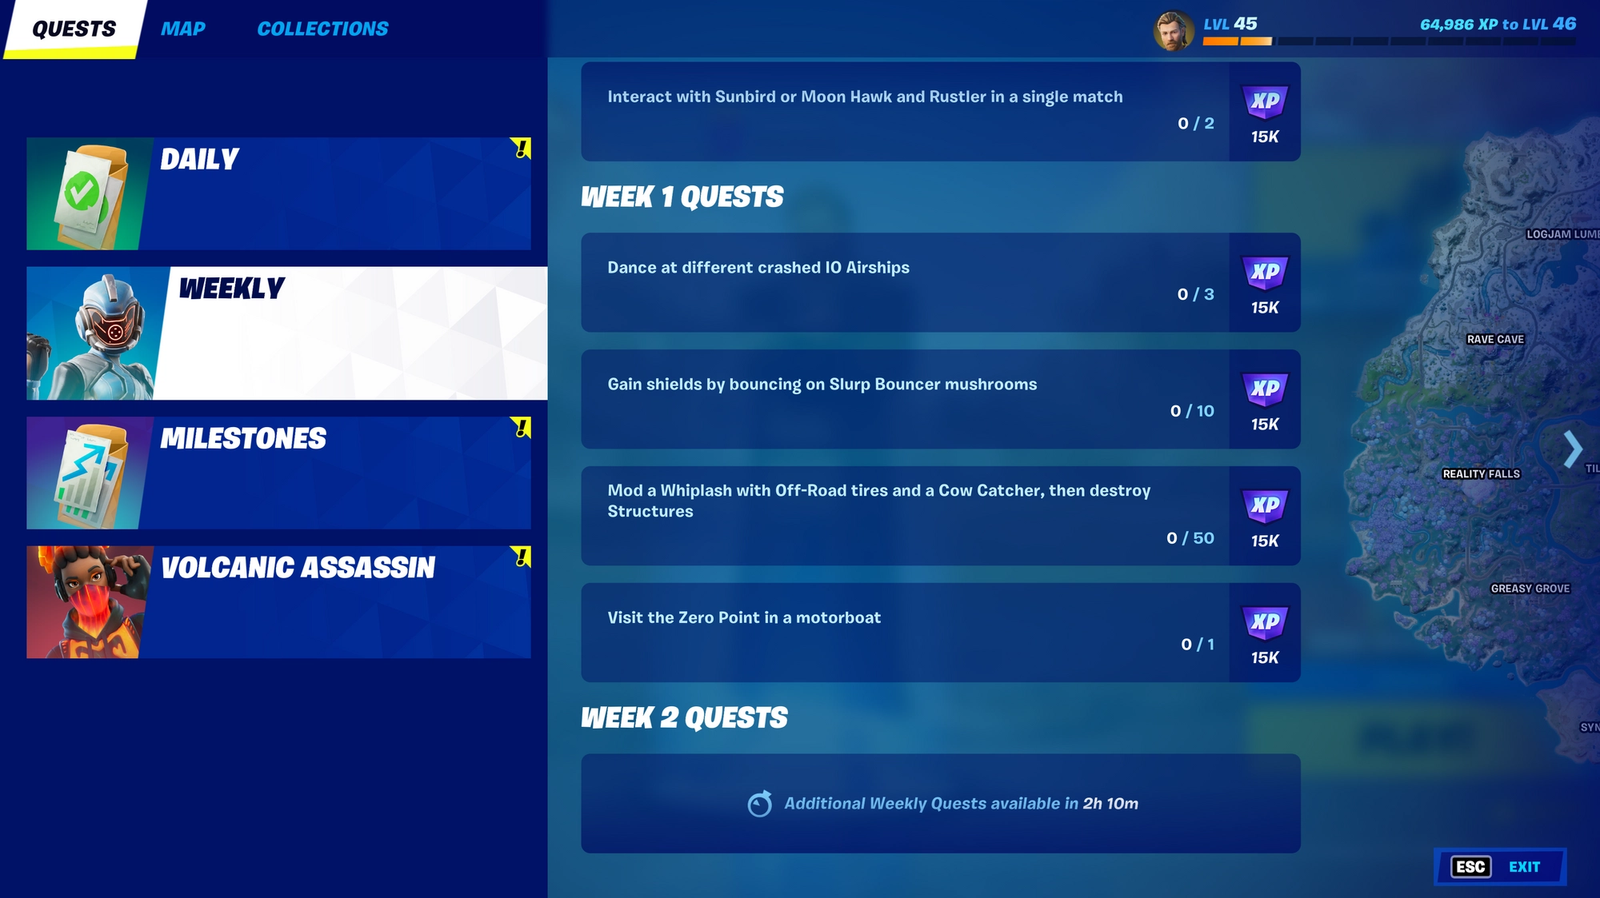 Fortnite Season 3 Week 2 Quests are coming today.